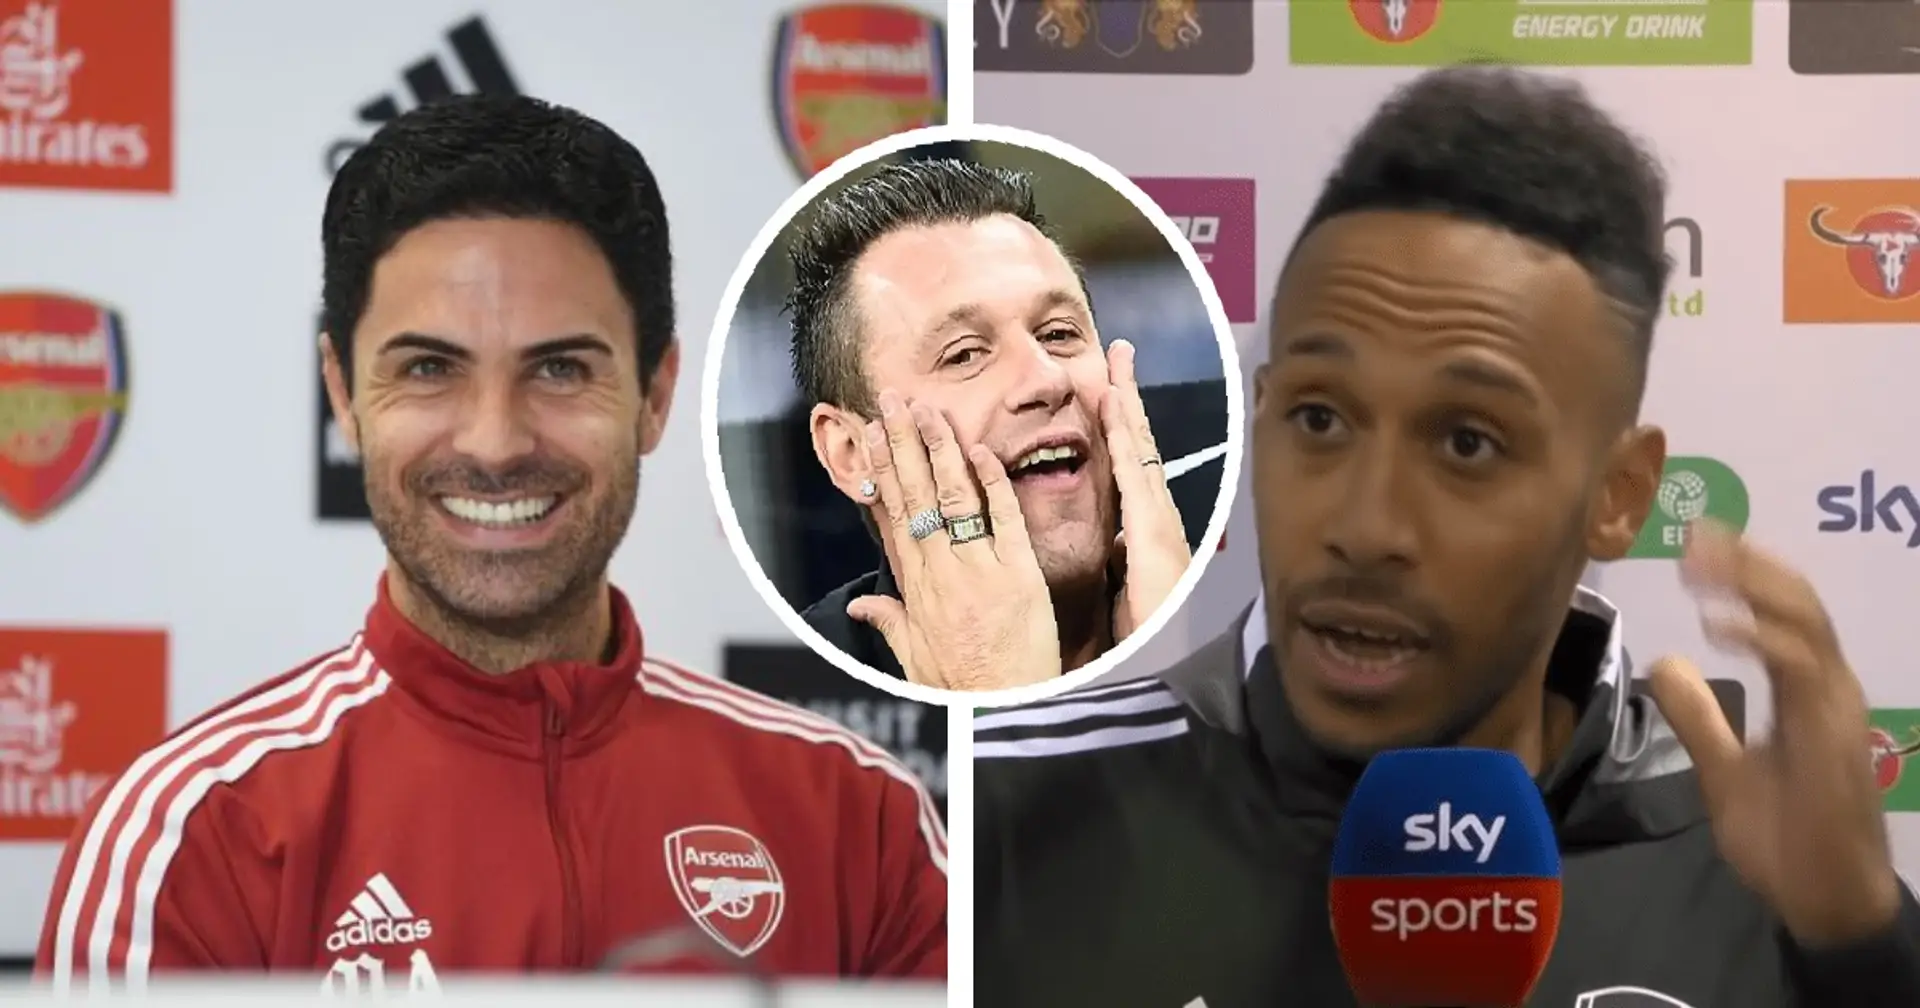 'He doesn’t know how to trap the ball': Cassano attacks Aubameyang over Arteta criticism